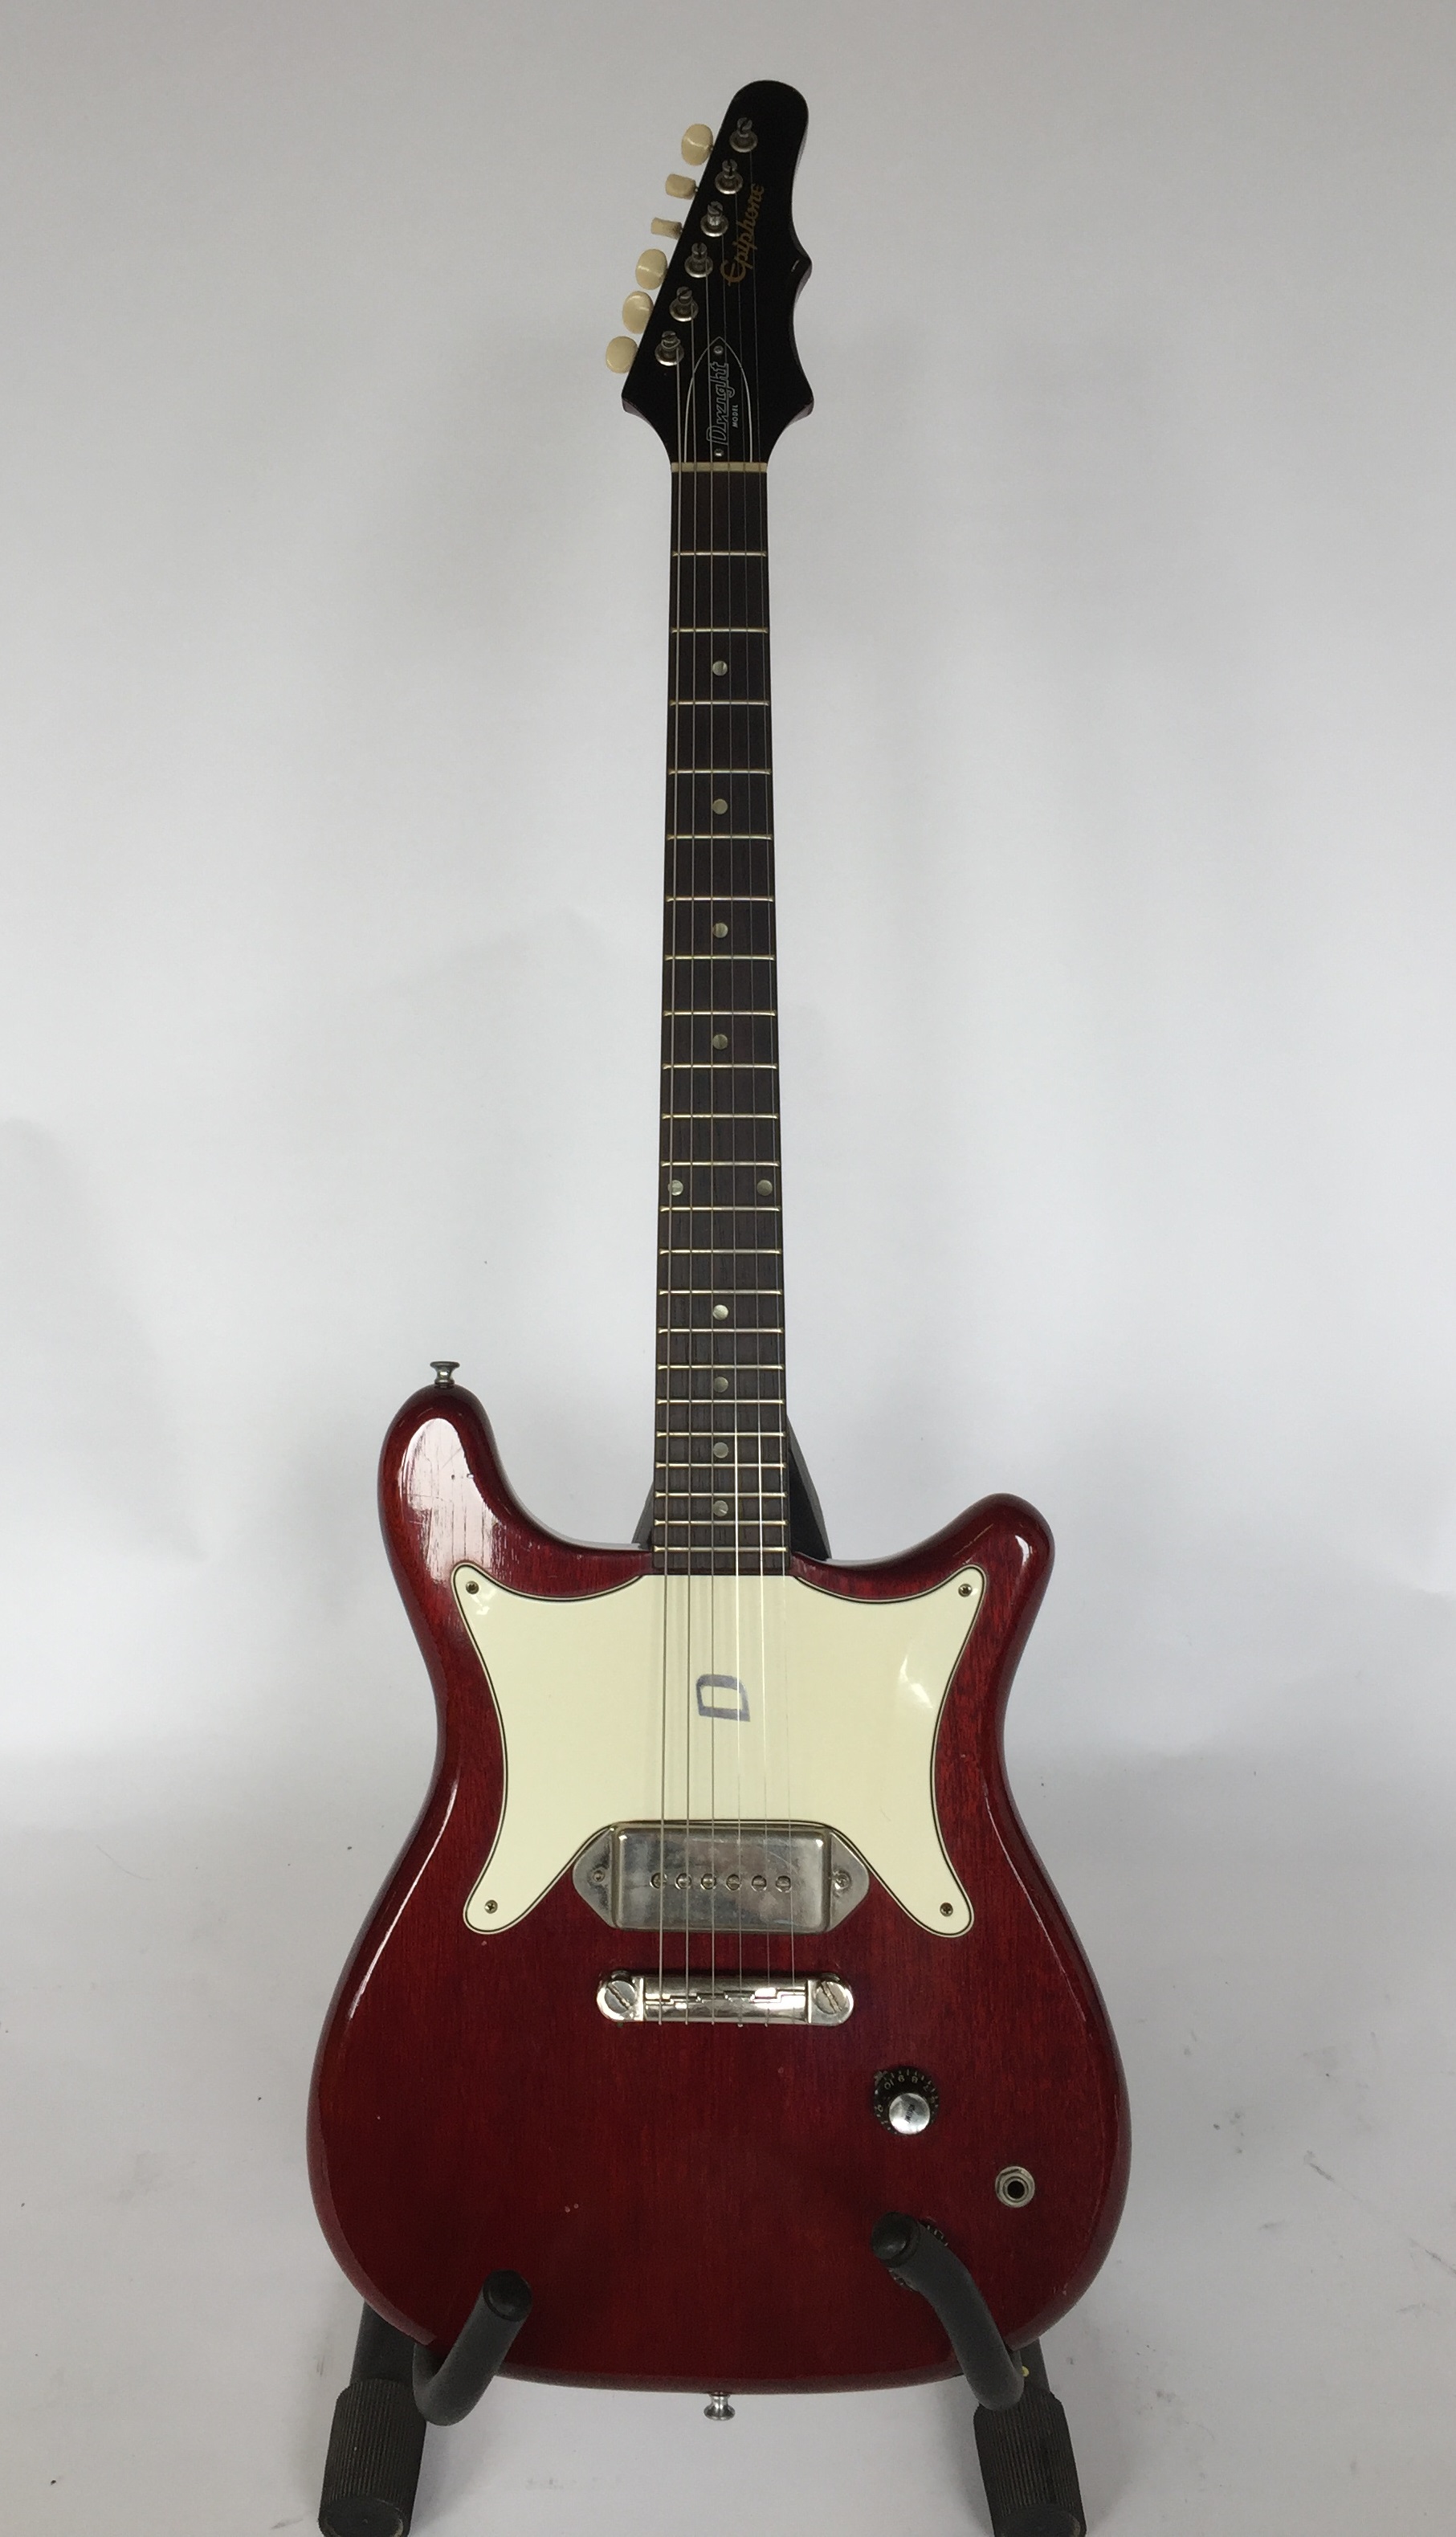 DWIGHT CORONET 1965 ELECTRIC GUITAR ***TEMPORARILY WITHDRAWN UNTIL RECEIPT OF CITES ARTICLE 10